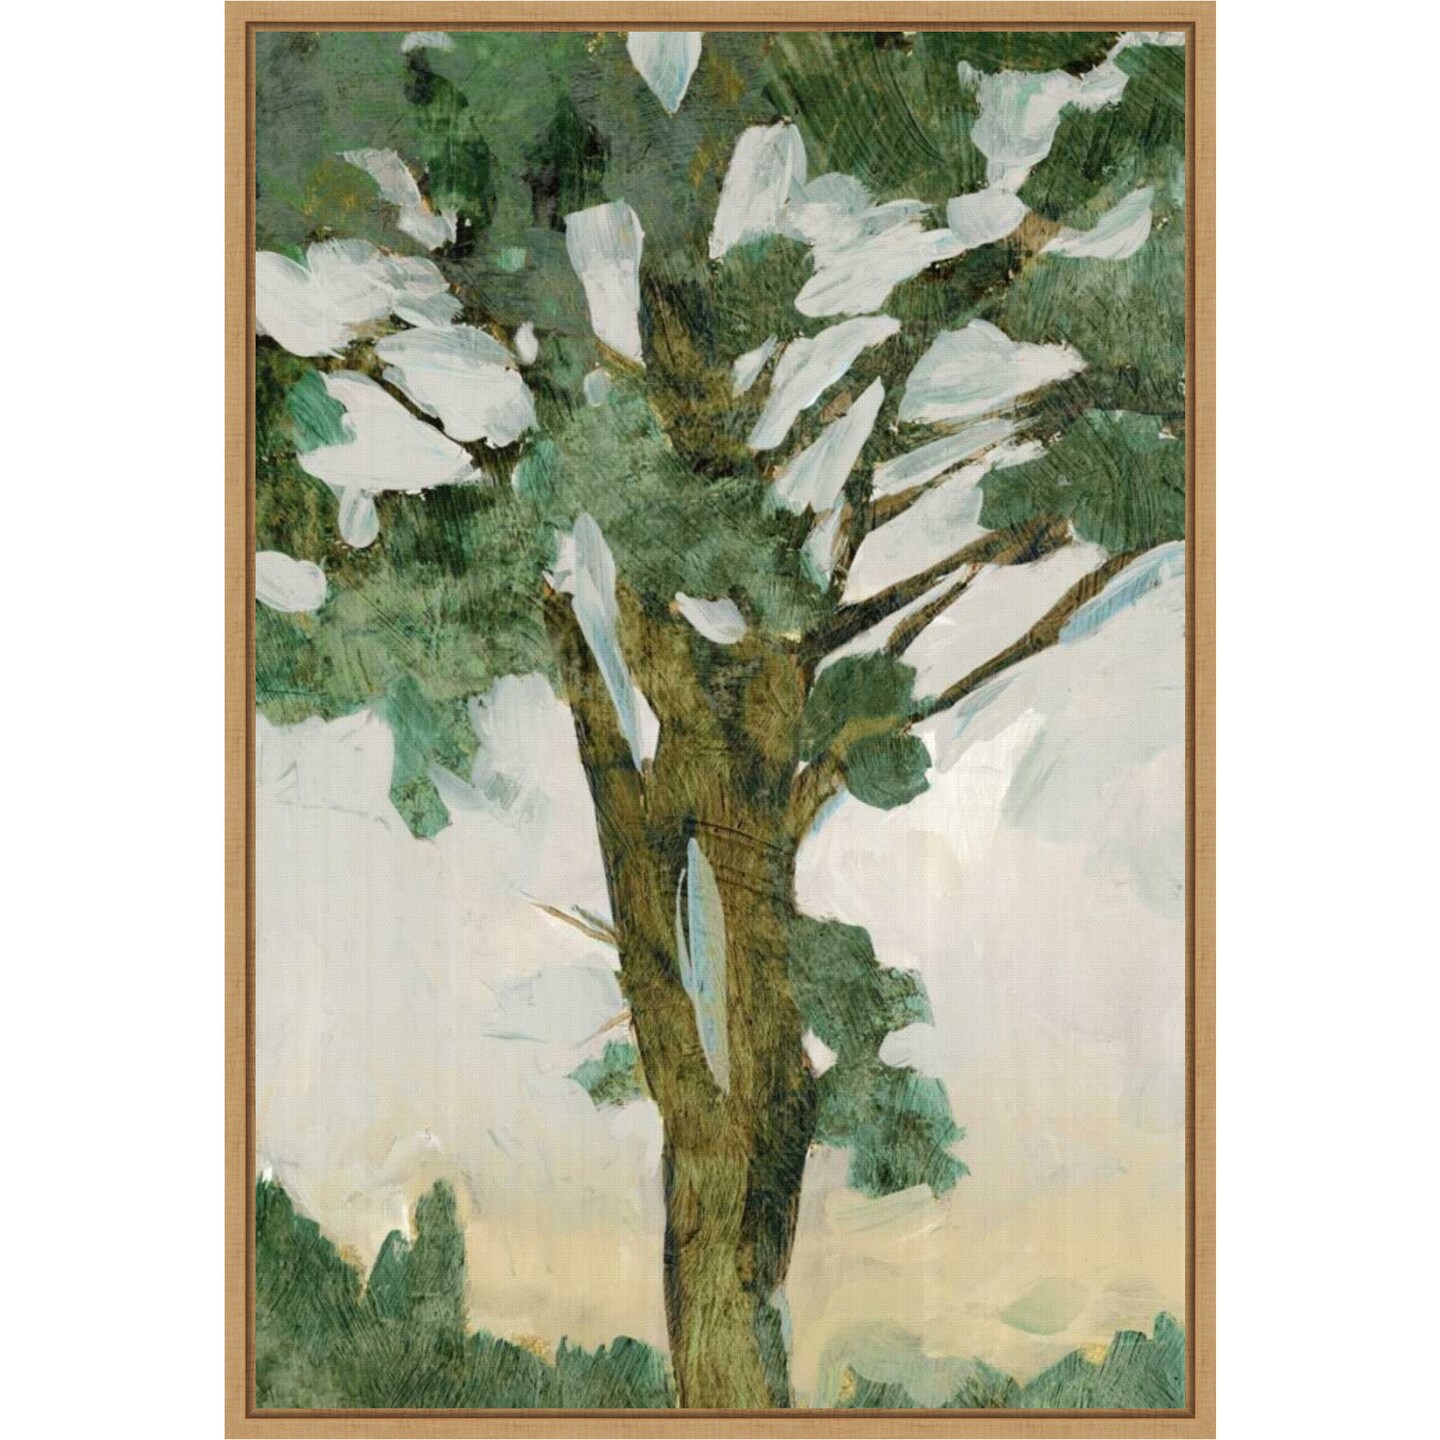 Green Tree Line I by PI Gallerie 16-in. W x 23-in. H. Canvas Wall Art Print Framed in Natural